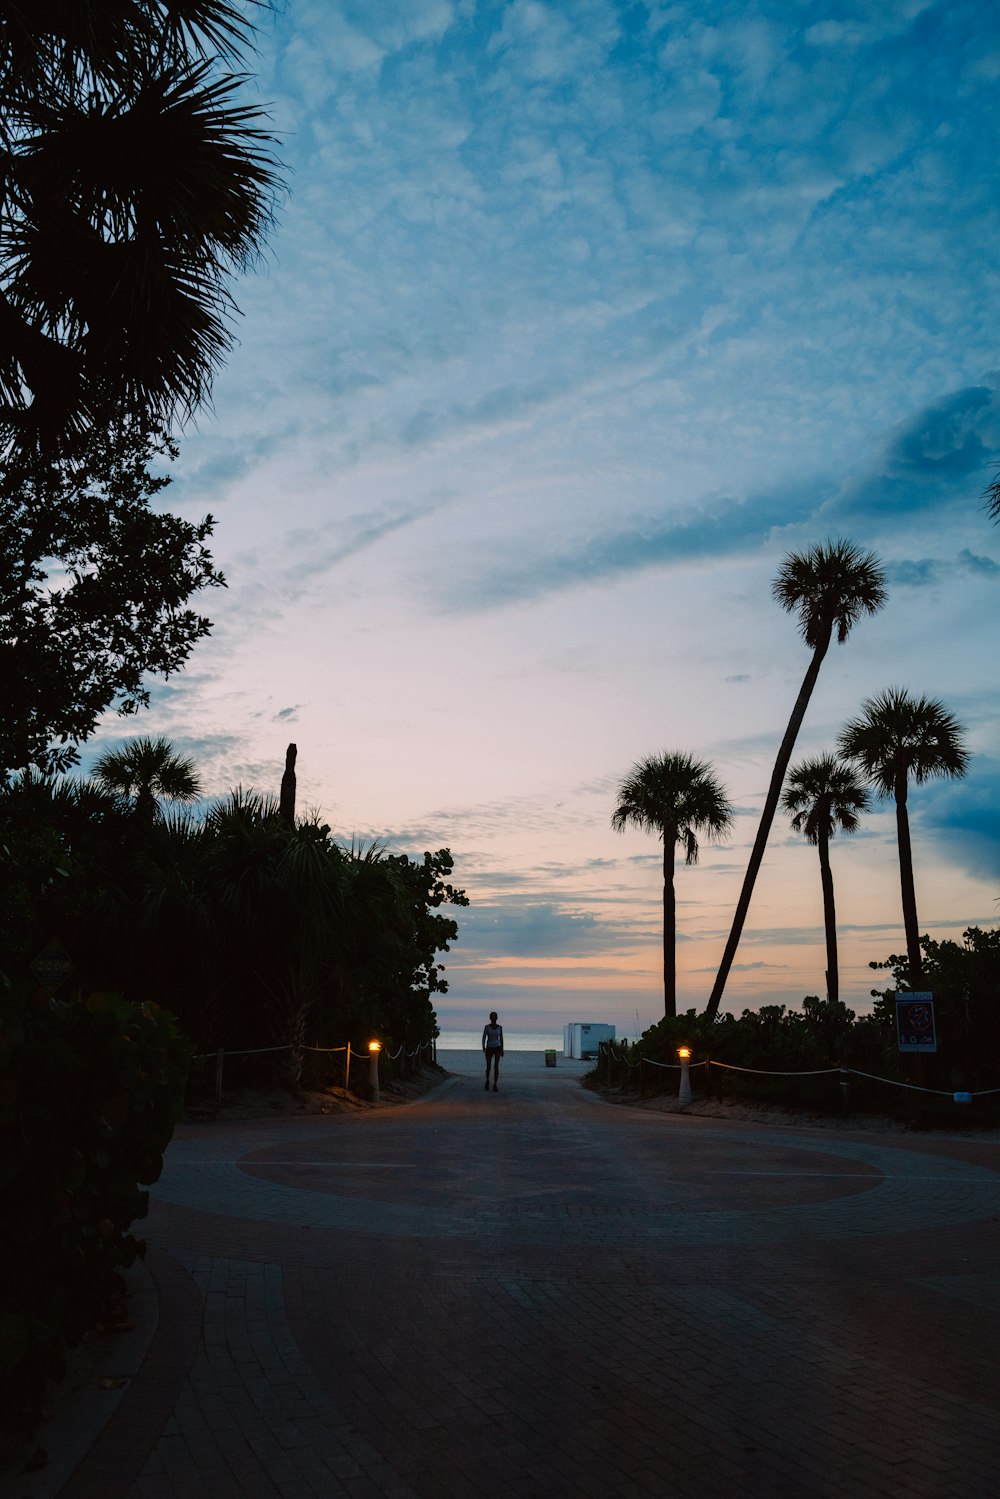 a person standing on the side of a road next to palm trees